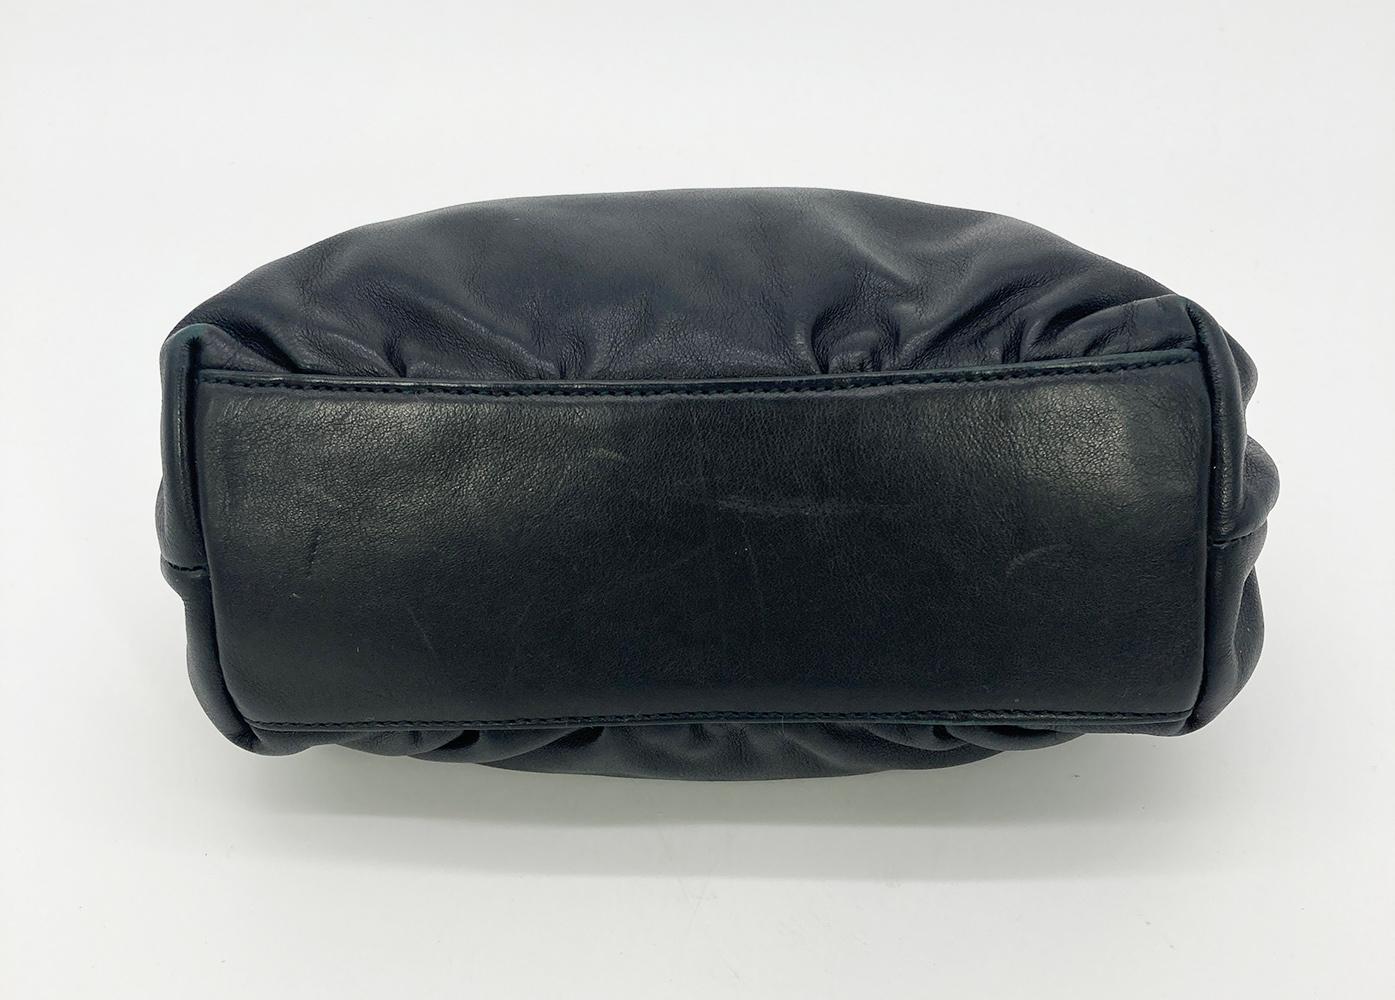 Judith Leiber Black Leather Crystal Diamond Top Clutch In Good Condition For Sale In Philadelphia, PA